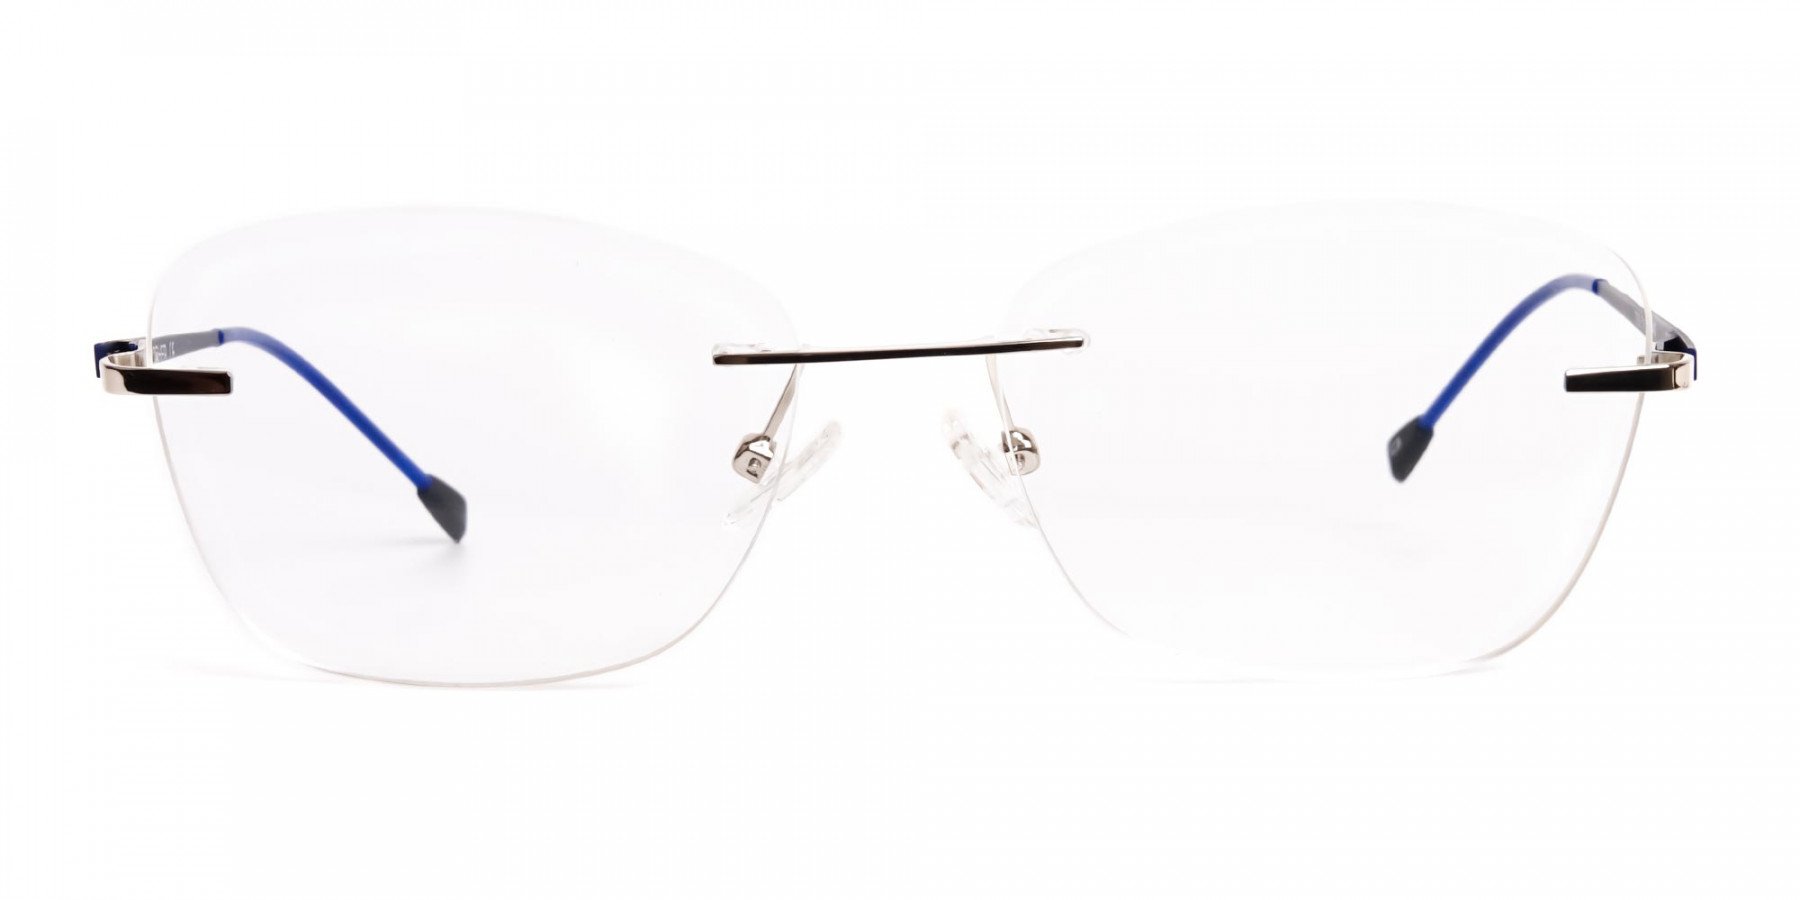 silver-and-blue-cateye-rimless-glasses-frames-1